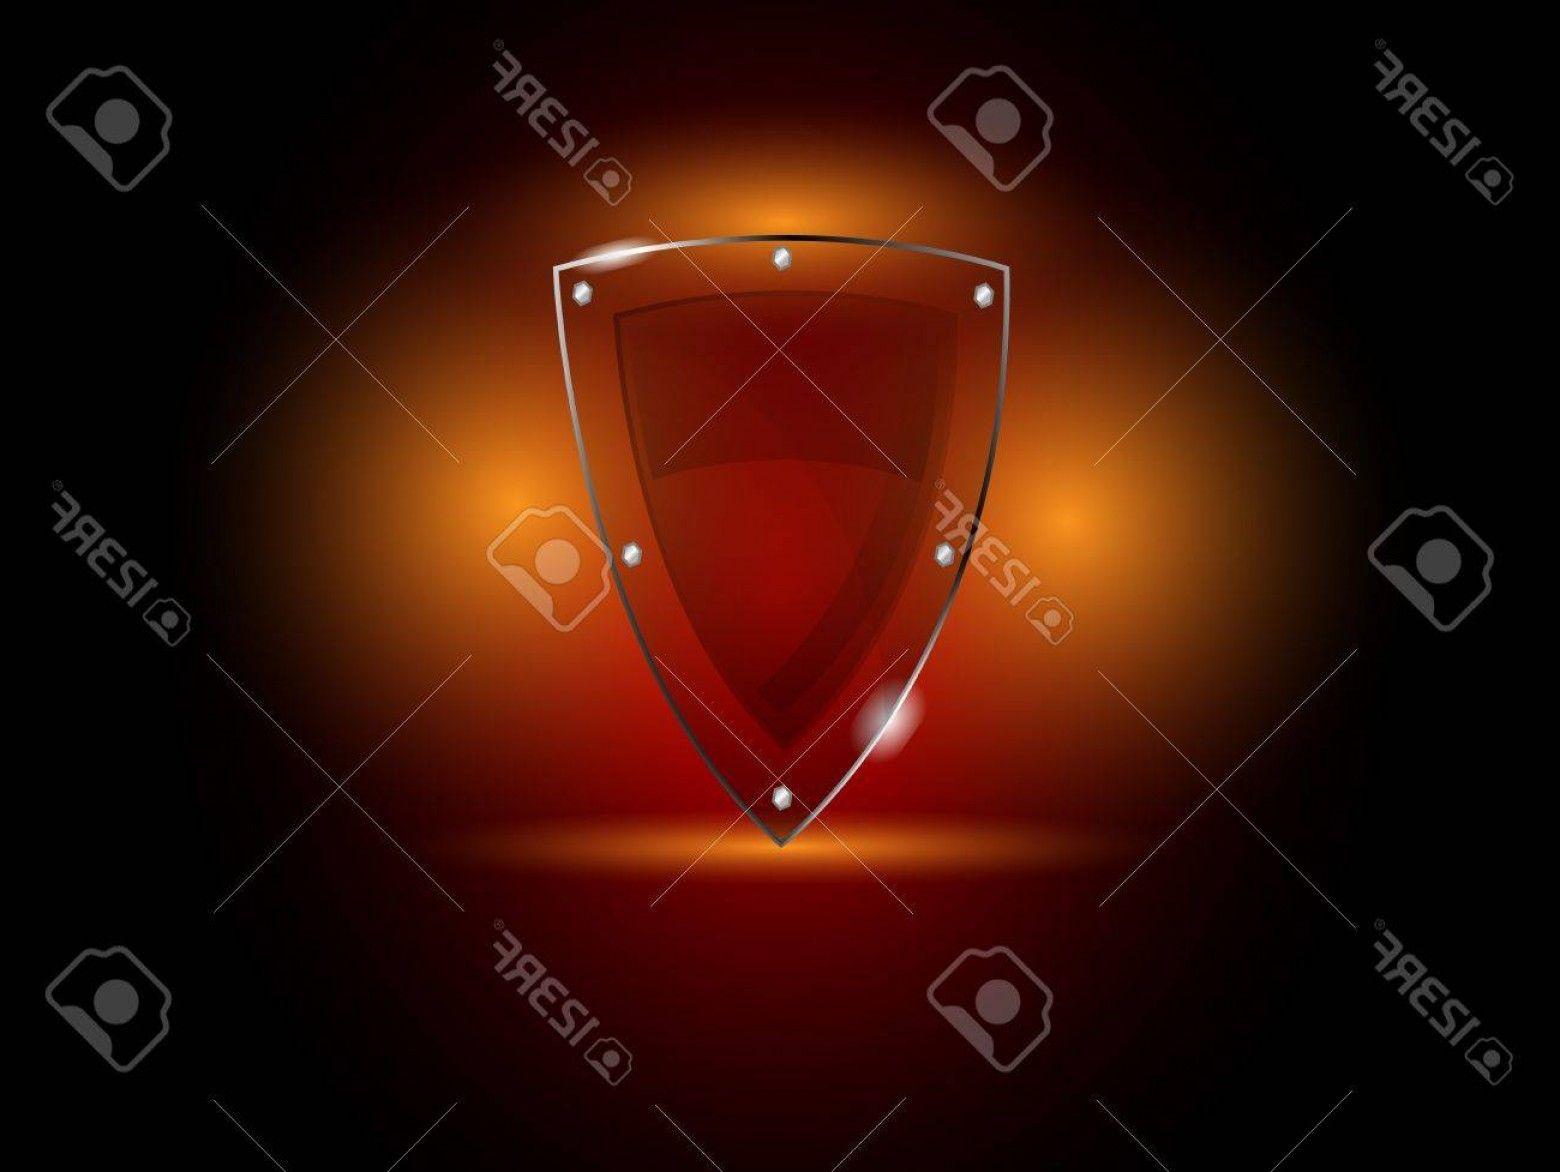 Red Security Shield Logo - Photovector Glass Security Shield Transparent And Clear Fire Red And ...